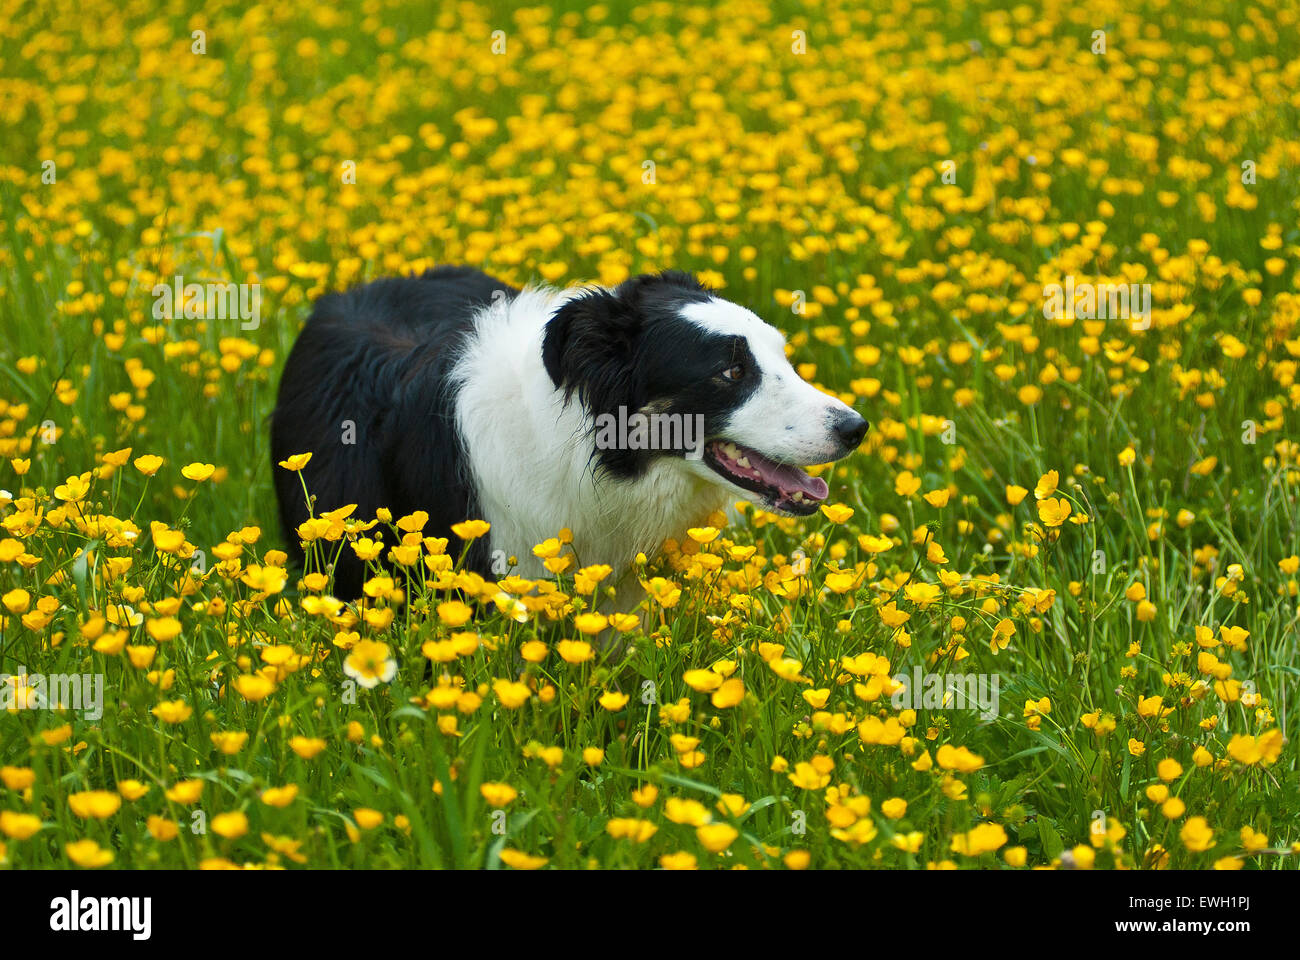 border collie dog in buttercup field of flowers Stock Photo